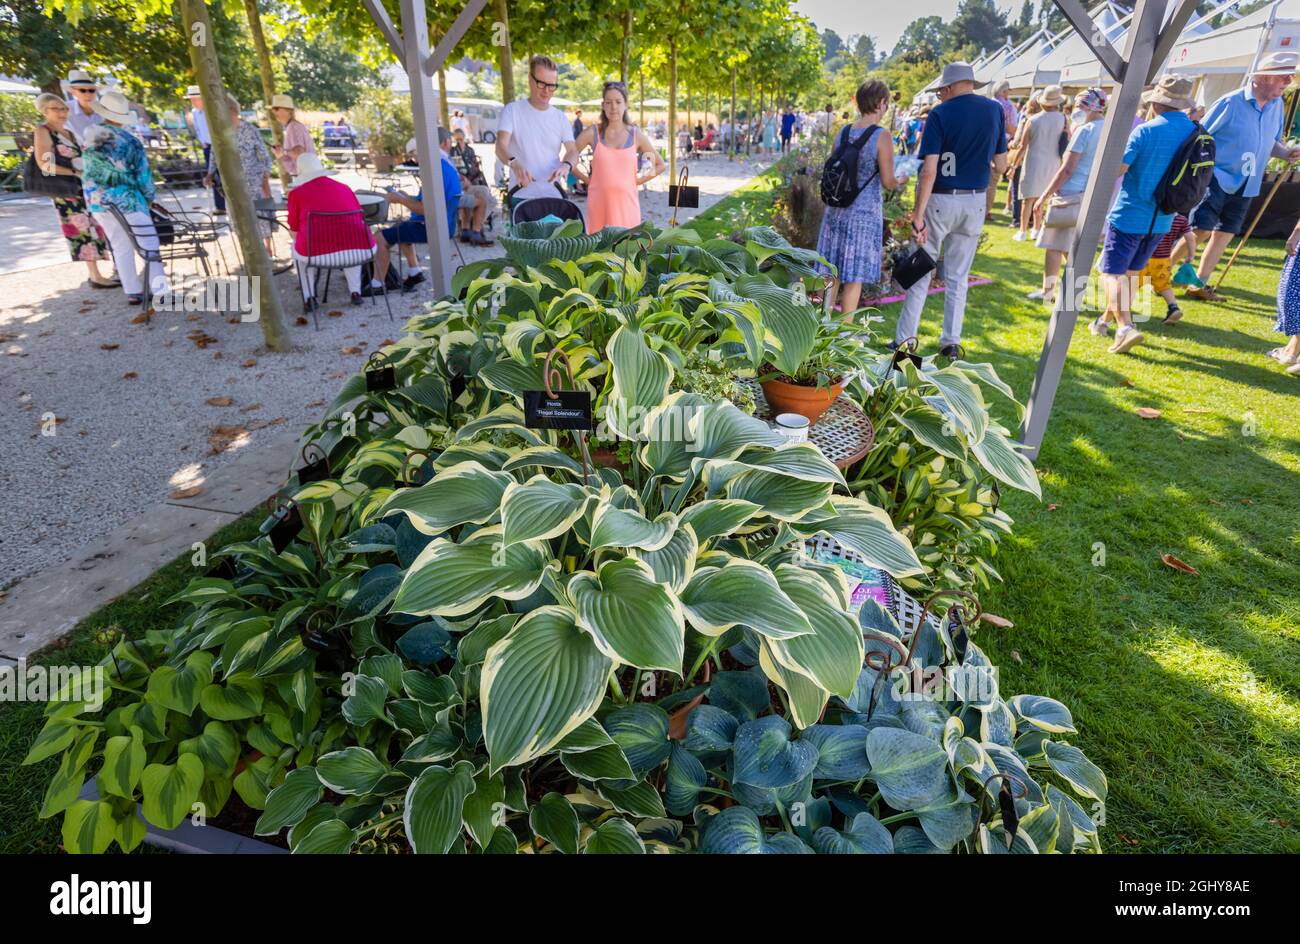 RHS Garden Wisley Flower Show 2021.  Visitors flock to the annual show in the iconic RHS Garden at Wisley, Surrey, on a sunny day in early September Stock Photo